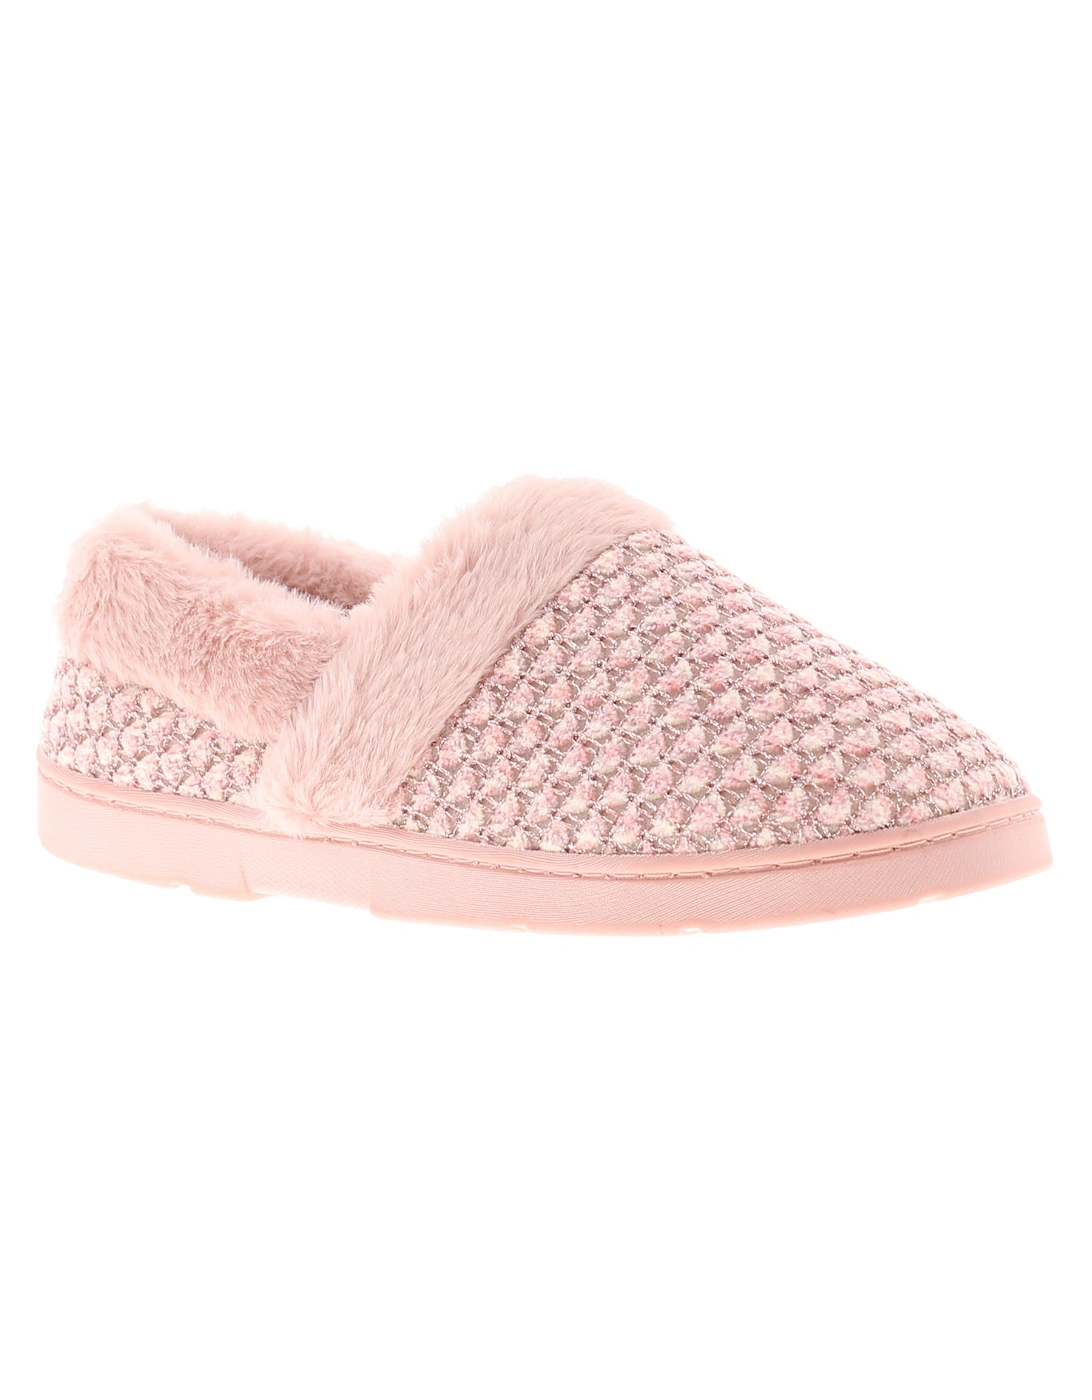 Womens Slippers Verity pink UK Size, 6 of 5